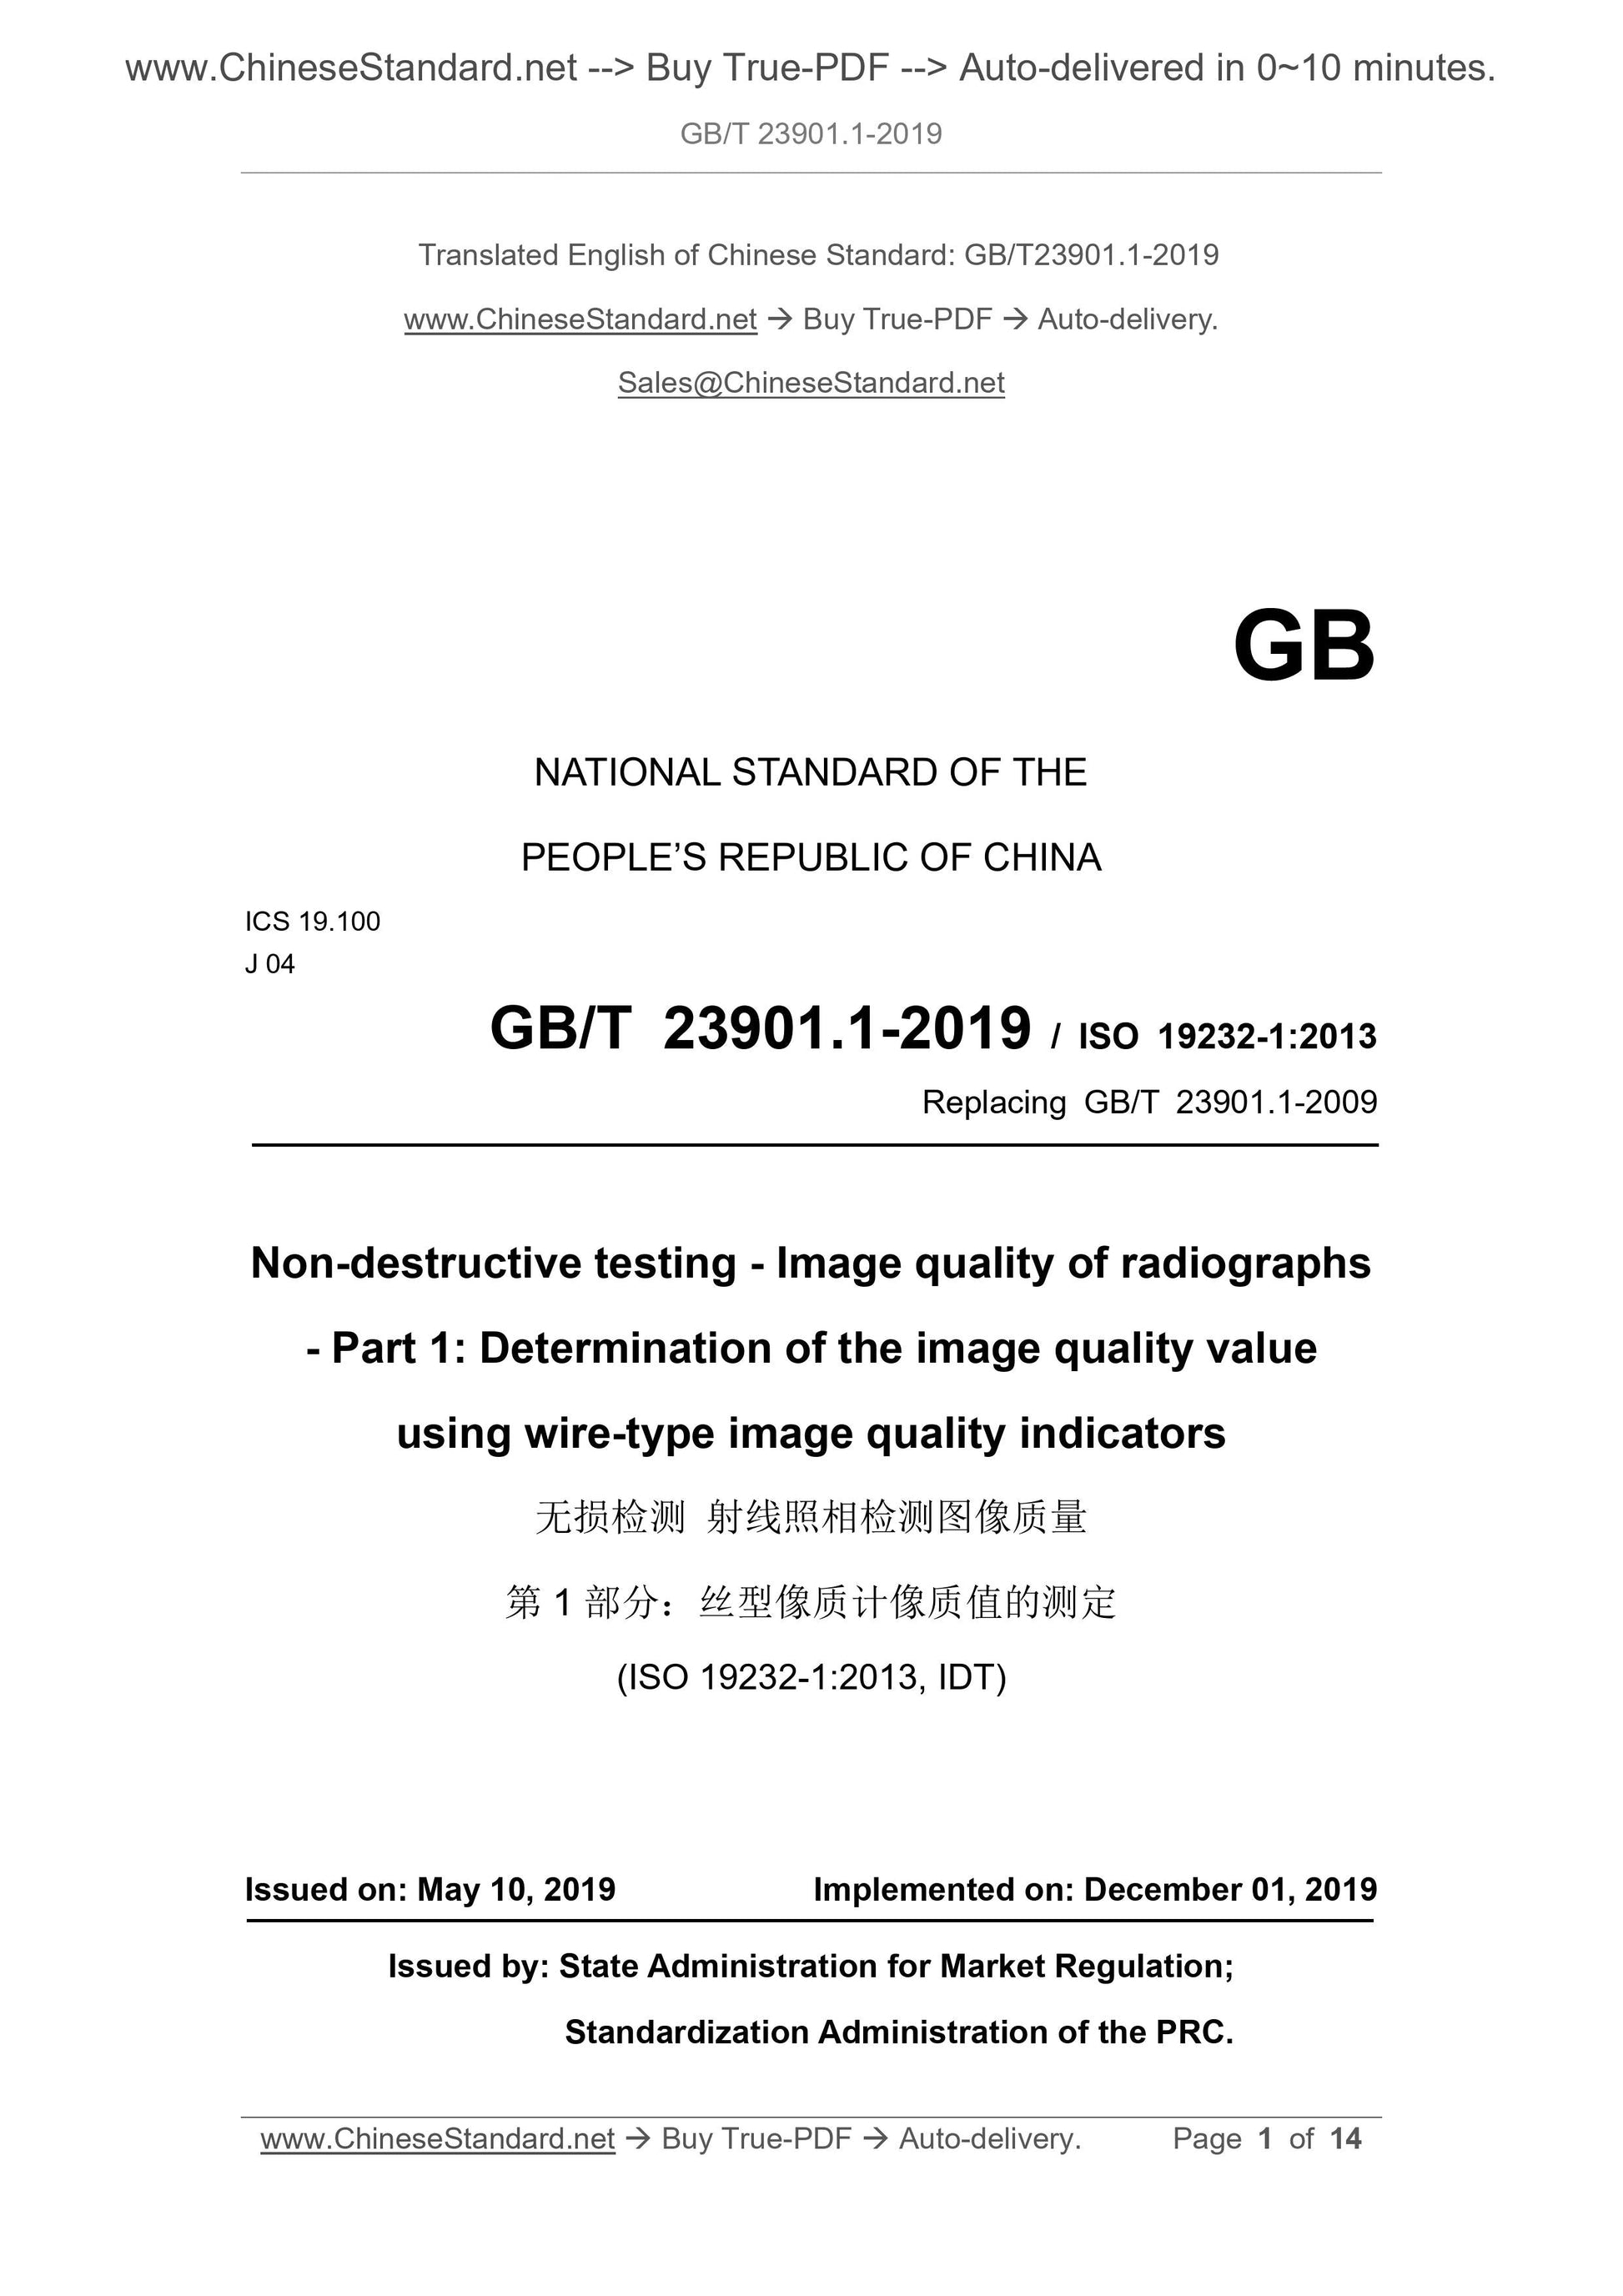 GB/T 23901.1-2019 Page 1